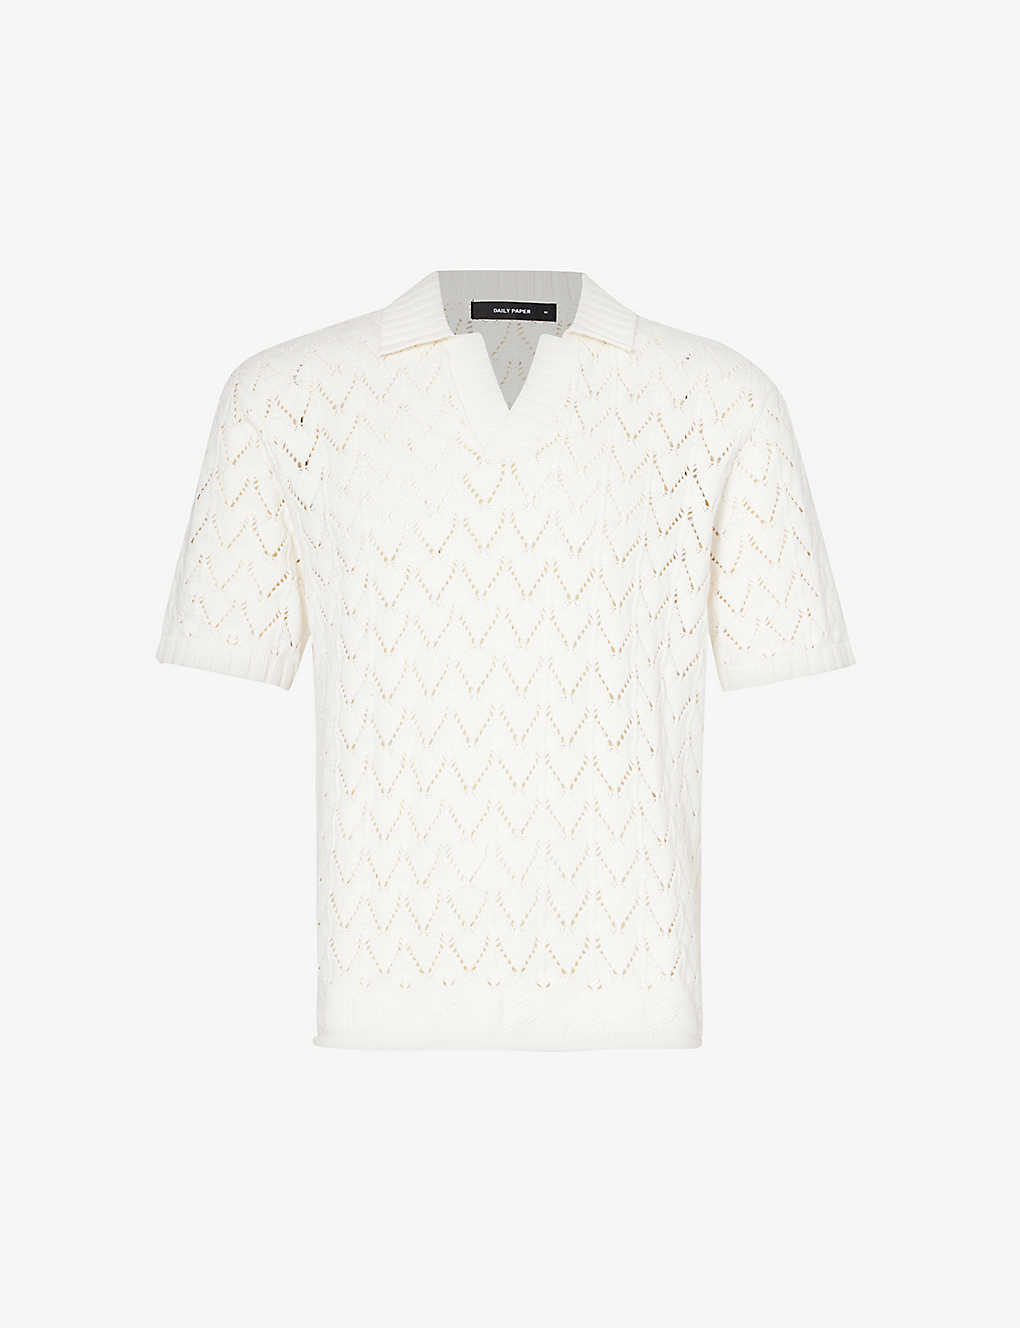 DAILY PAPER DAILY PAPER MEN'S WHITE YINKA PATTERNED COTTON-KNIT POLO SHIRT